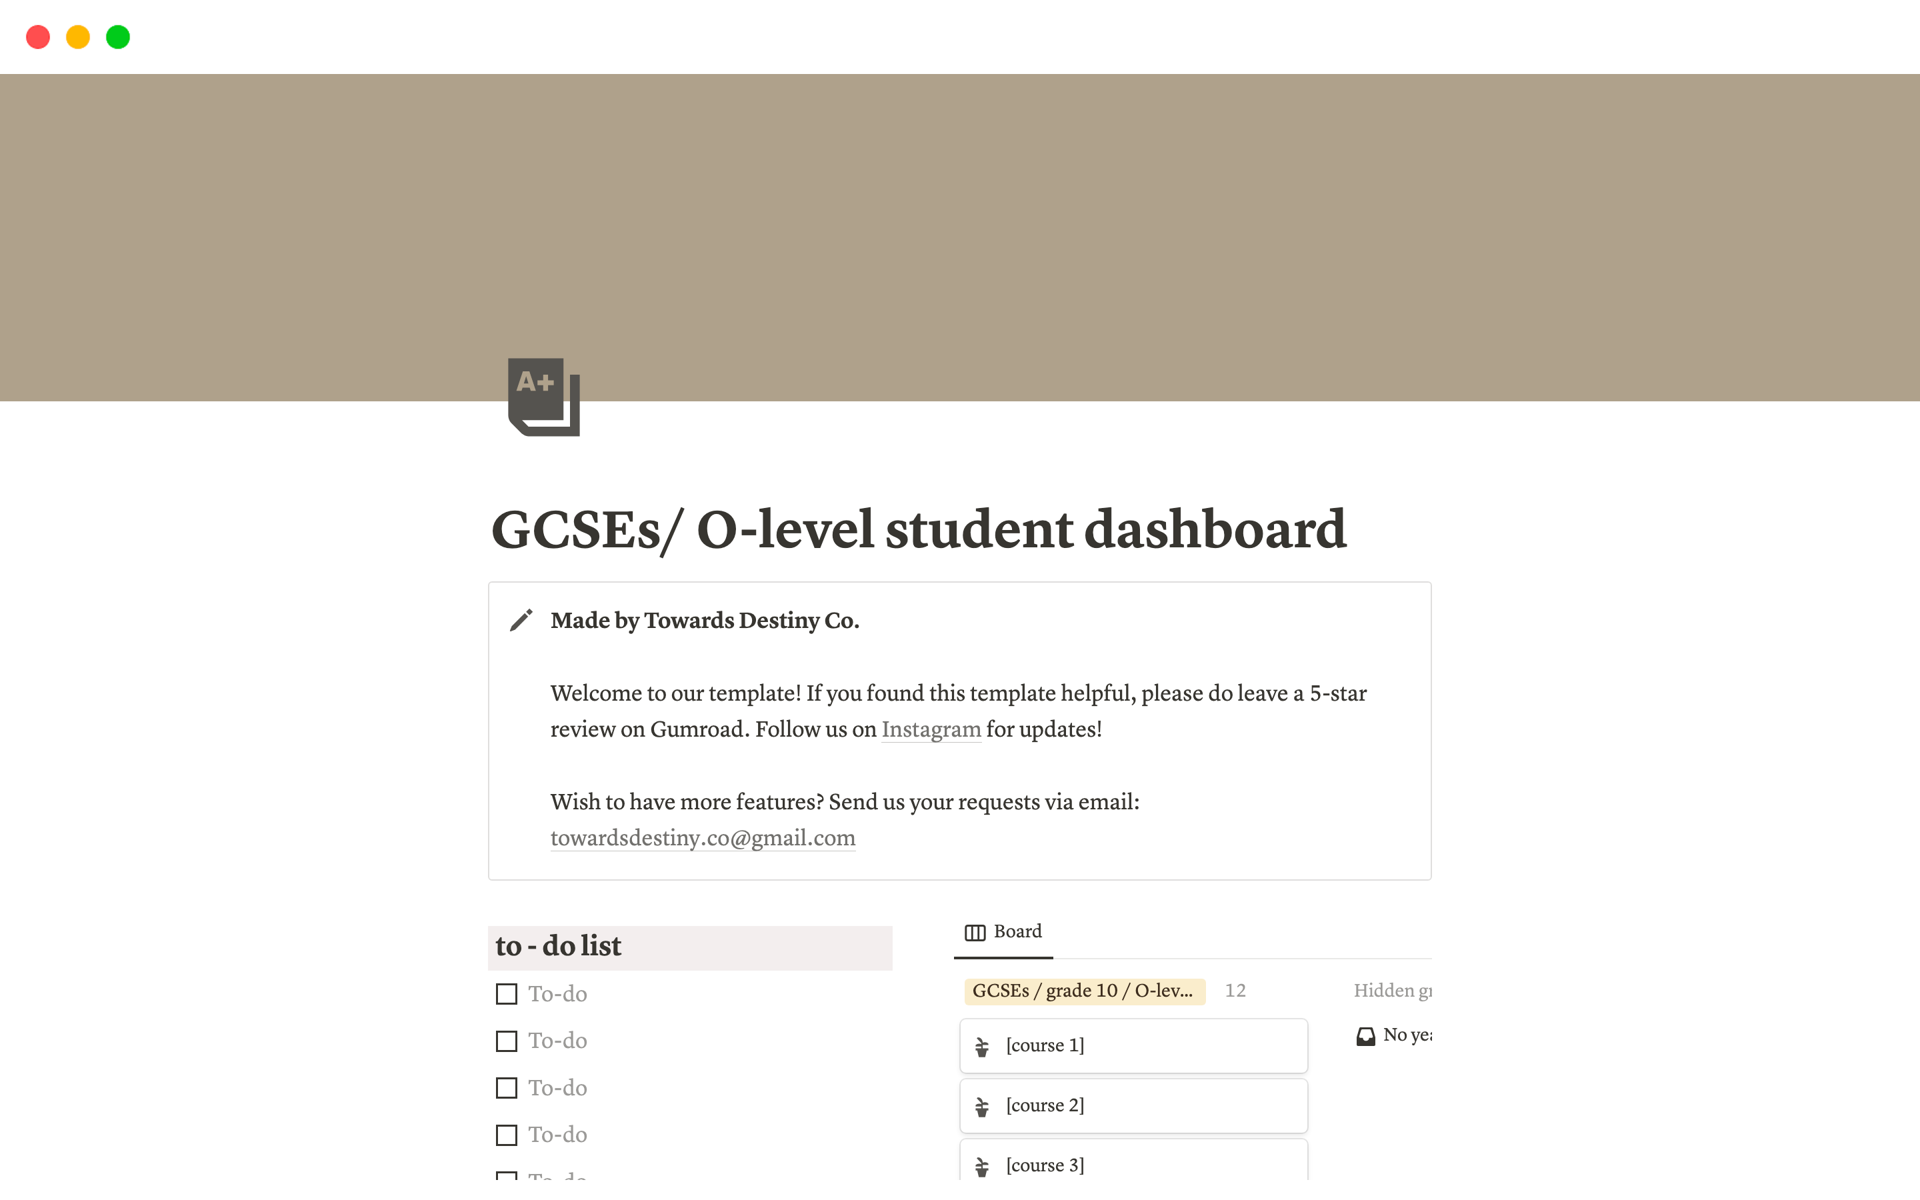 Introducing a pre-built template crafted to help O-level/ GCSE students manage their academic life. Simplify your student life by prioritizing your classes, notes, past- papers, and exams, empowering you to excel with ease.